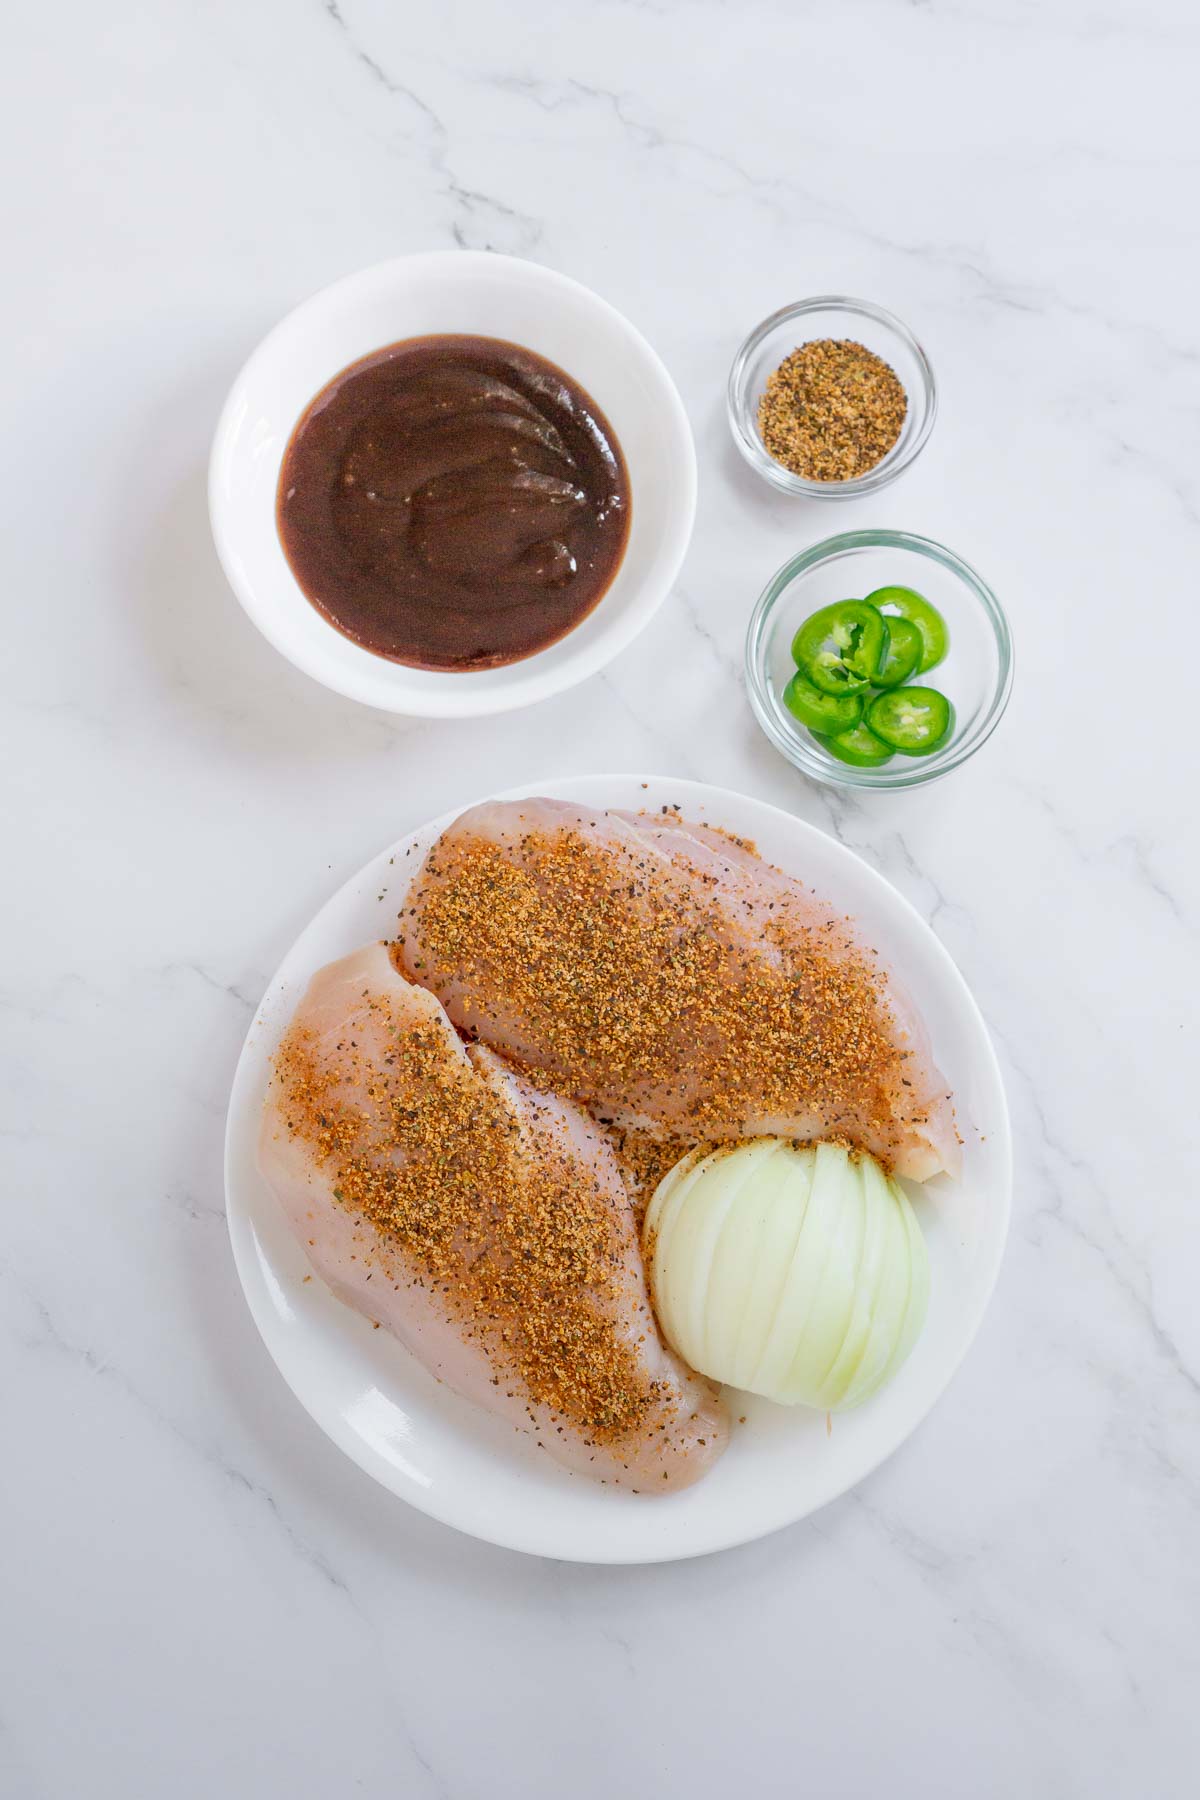 Ingredient to make sous vide shredded chicken: chicken breasts, BBQ sauce, seasoning, onion, and jalapenos.